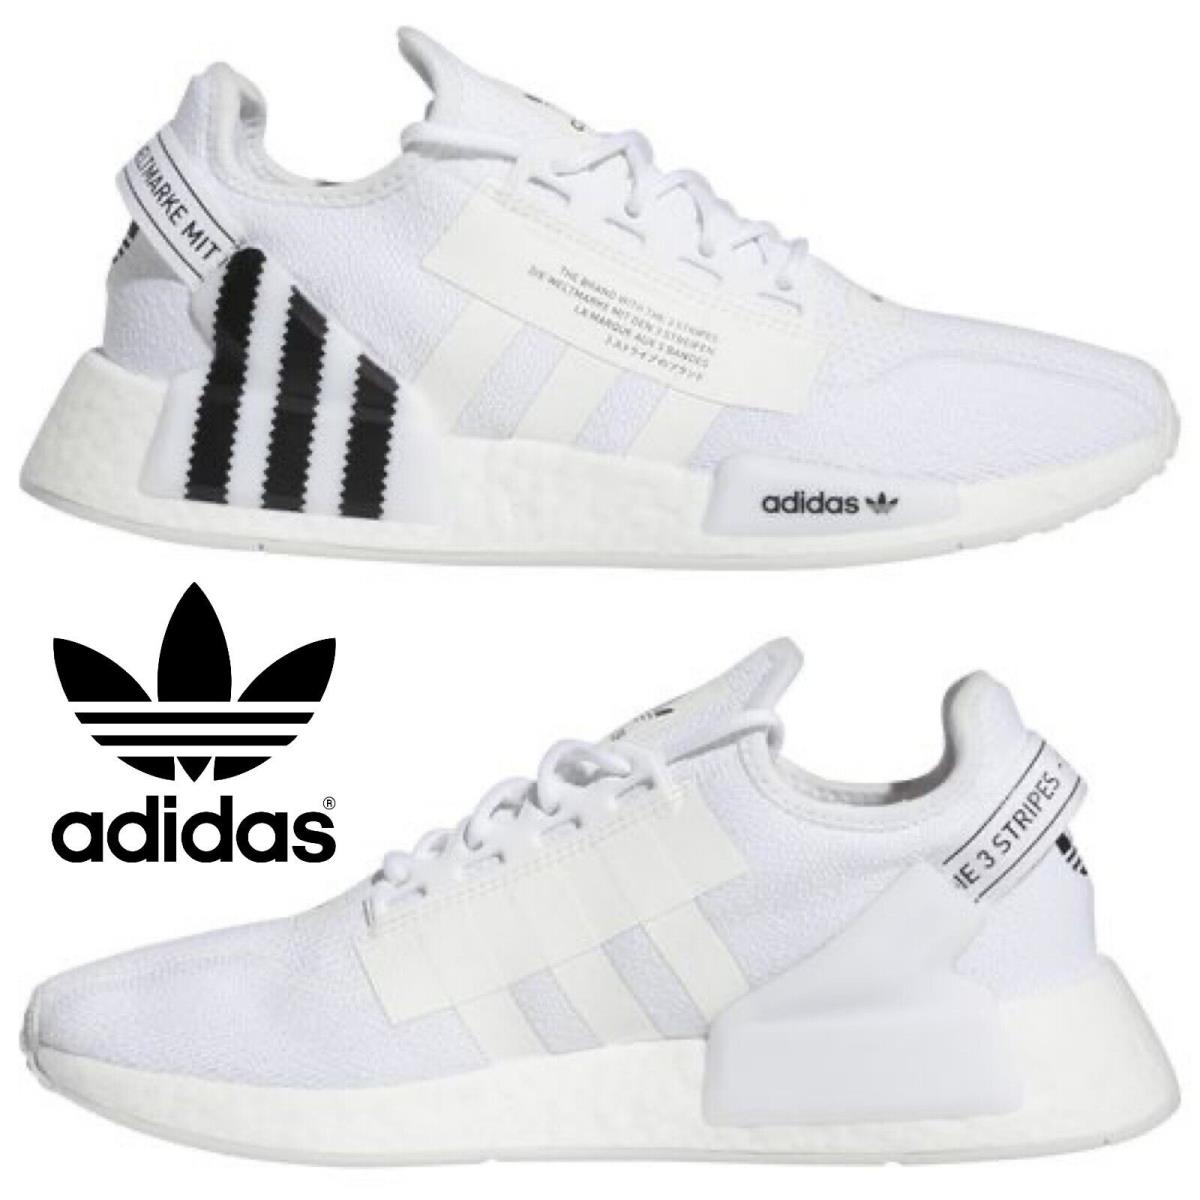 Adidas Originals Nmd R1 V2 Men`s Sneakers Running Shoes Gym Casual Sport White